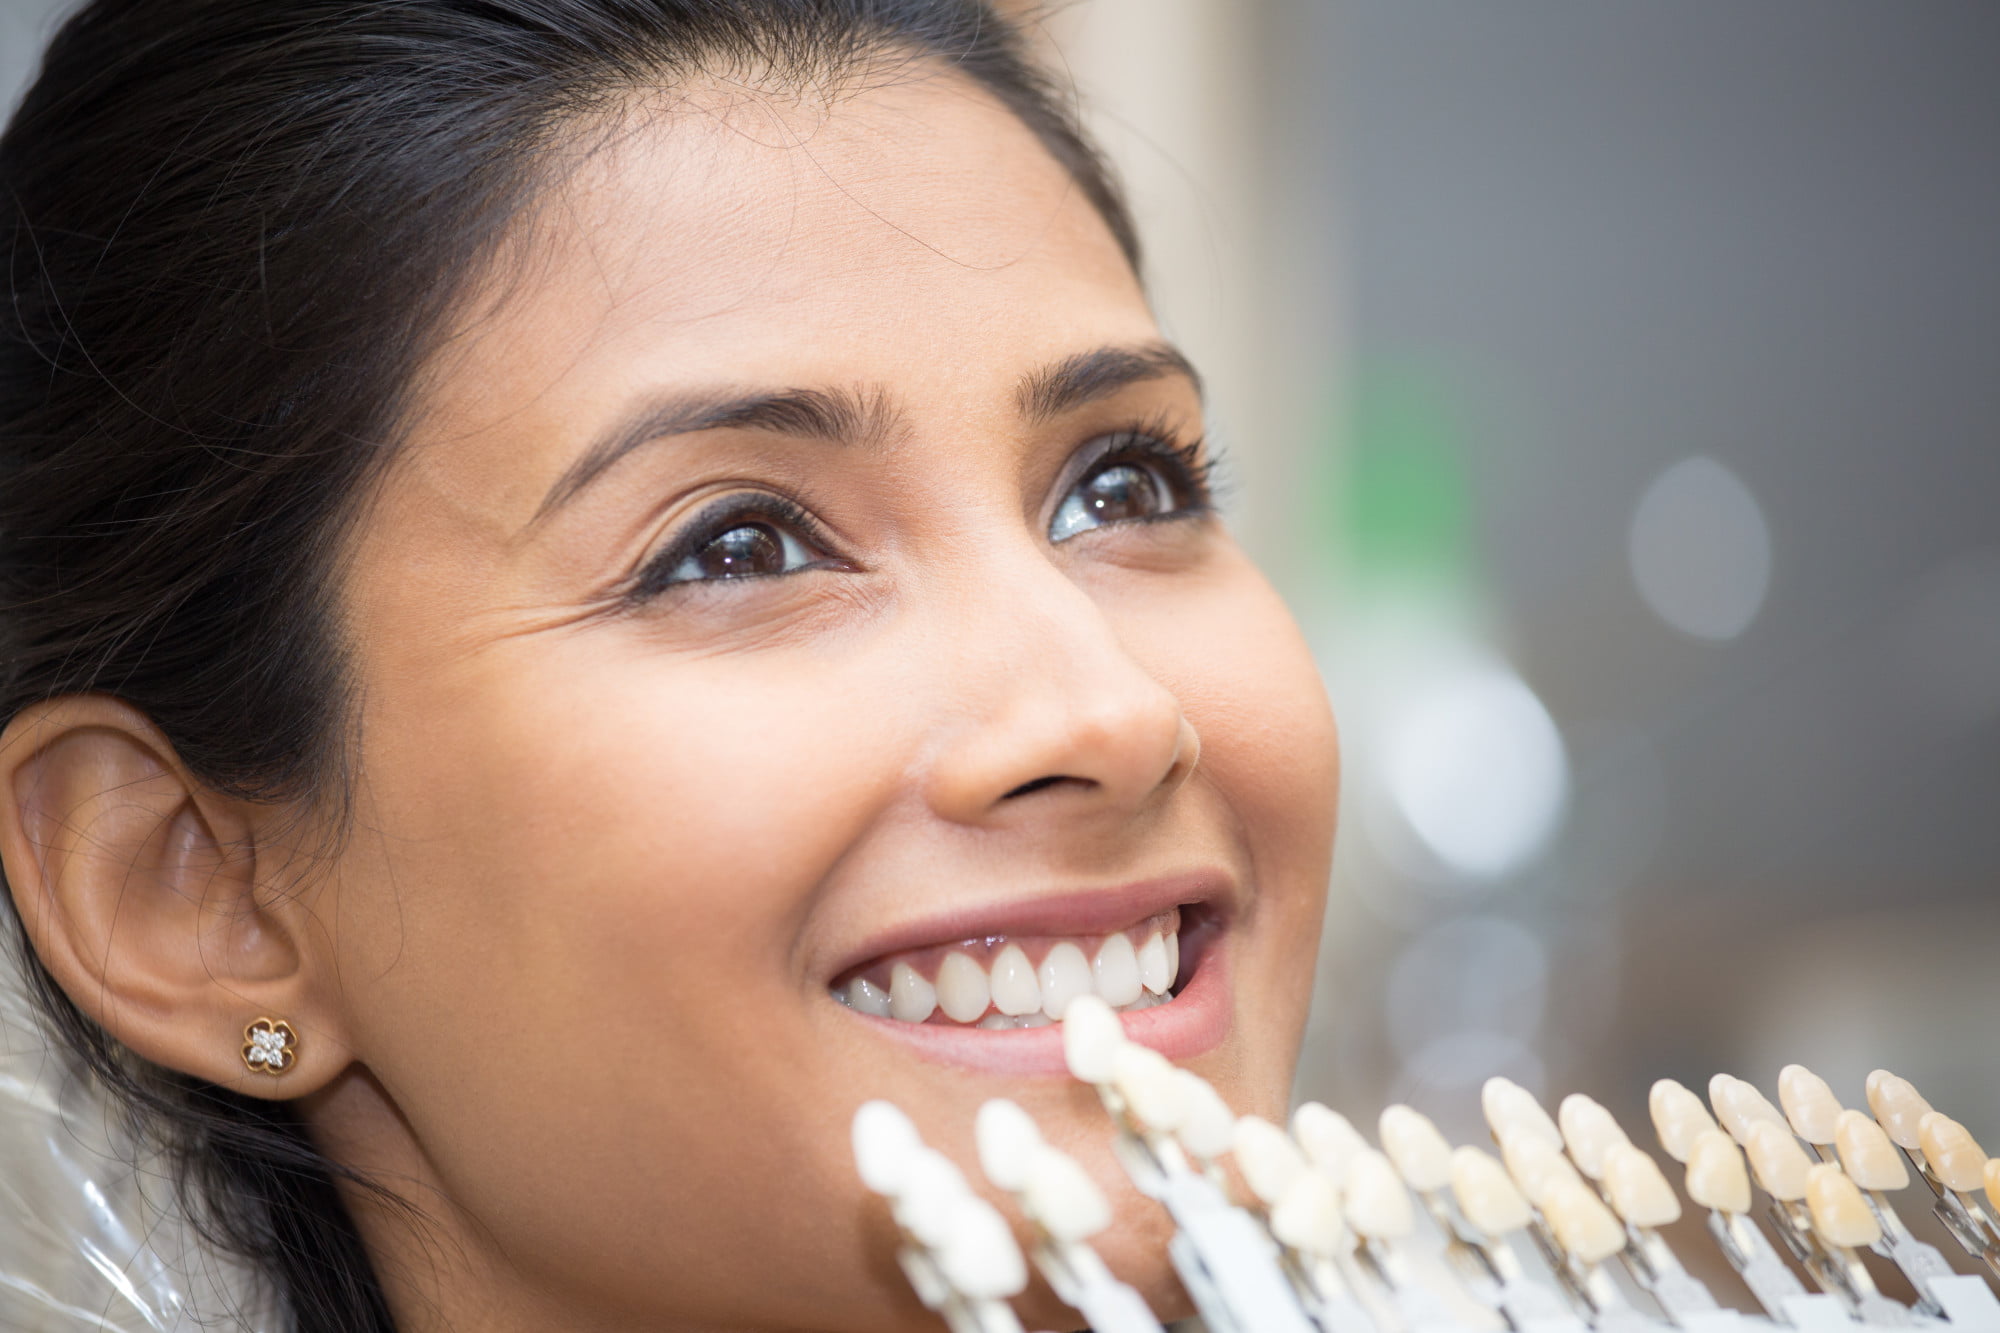 Want to improve your smile and confidence with veneers? Learn about the different types of veneers and their cost before making an appointment.